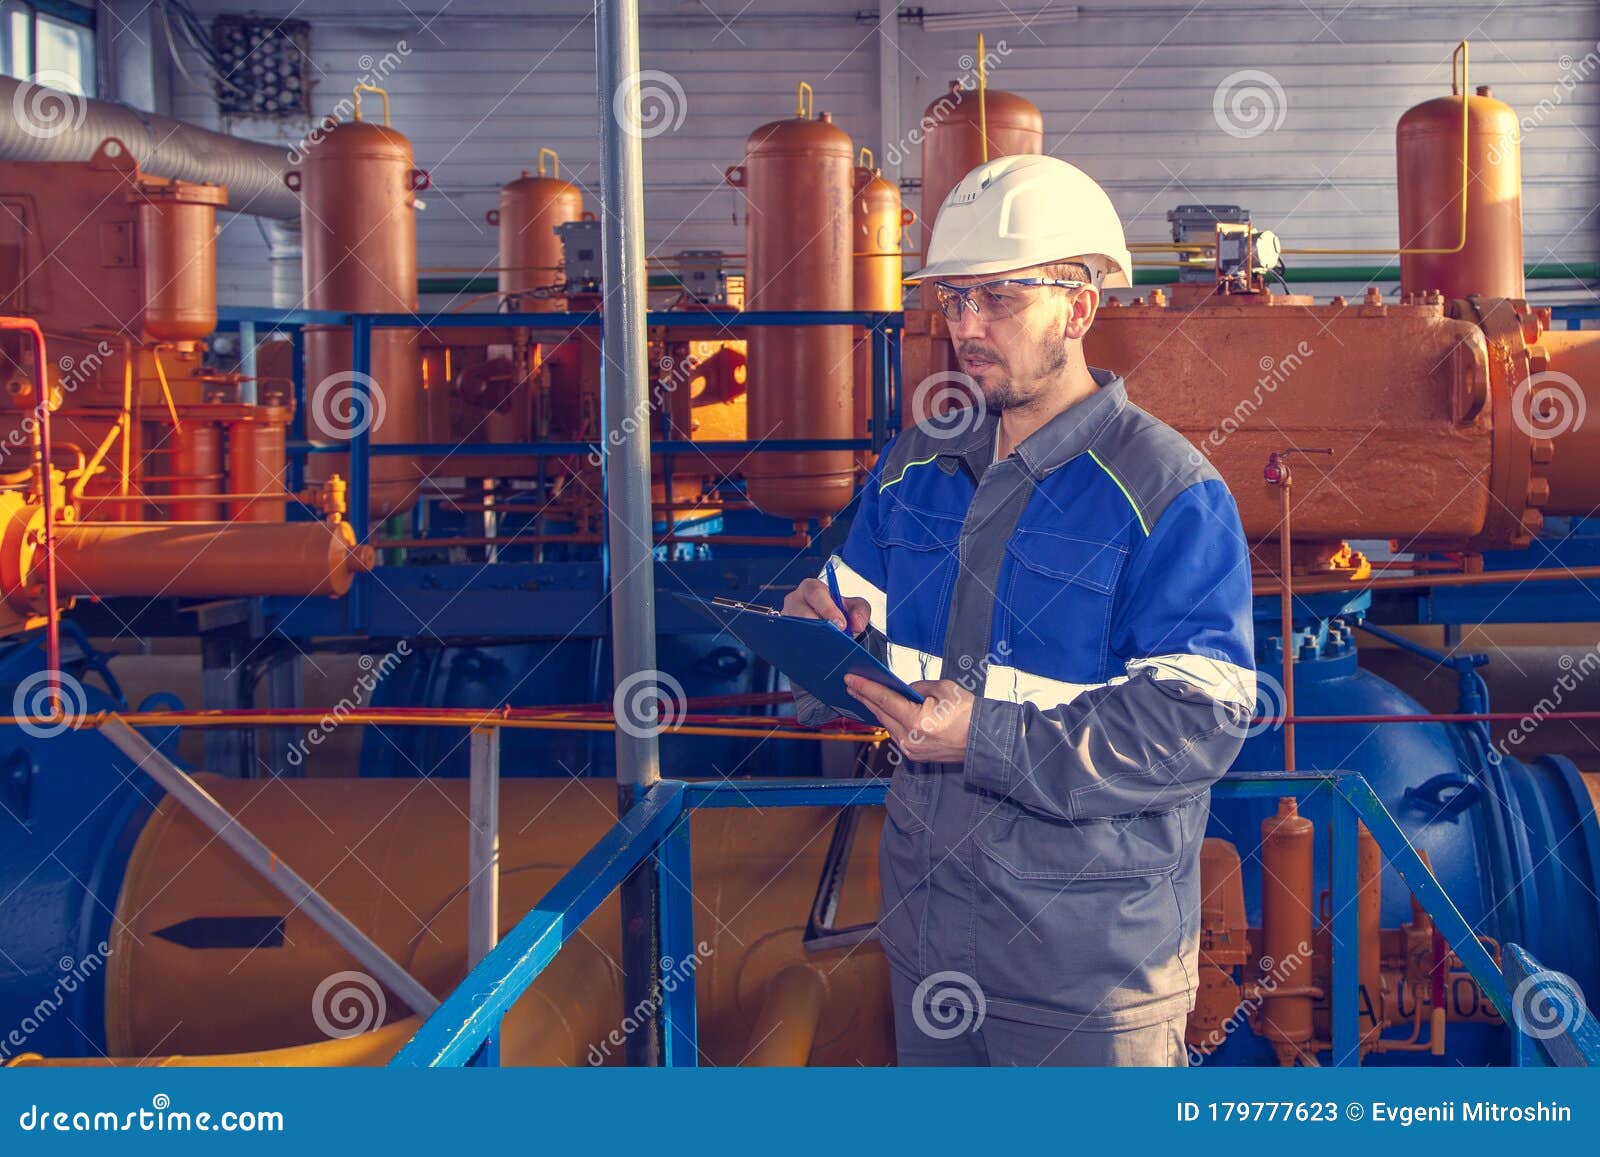 The Mechanic The Repairman Operator Production Gas Oil Gas Industry Gas Conditioning Equipment And Valve Armature Stock Image Image Of Pipe Fossil 179777623